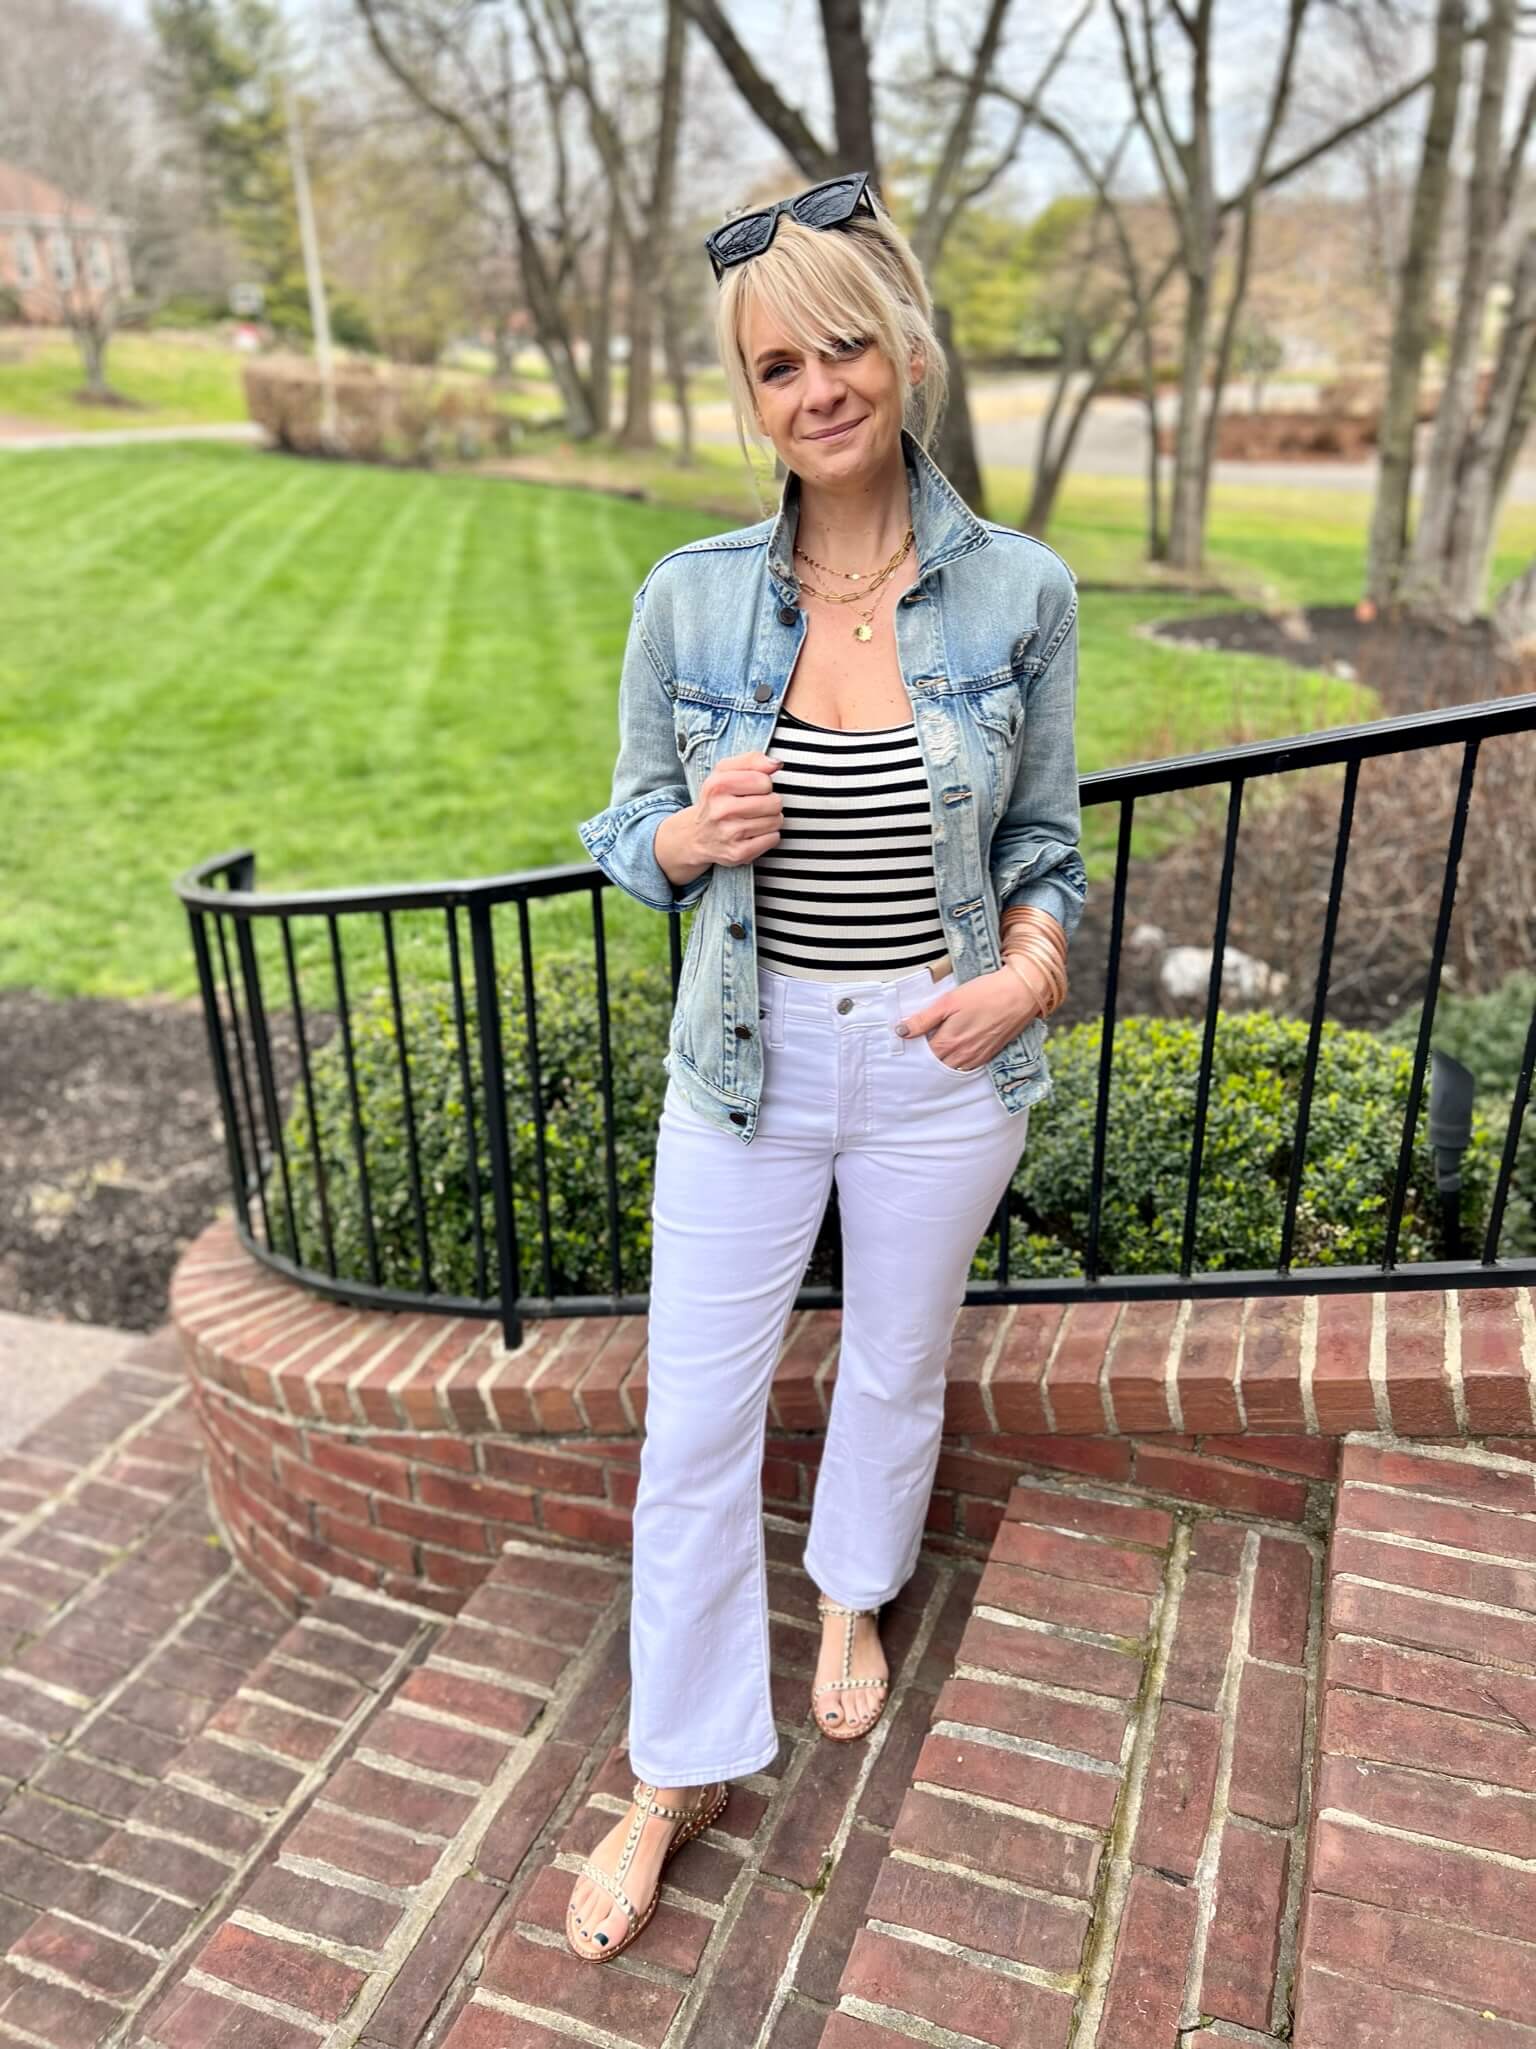 How To Wear Our Spring Capsule Wardrobe – Part 1 Striped Tank & White Jeans & Denim Jacket